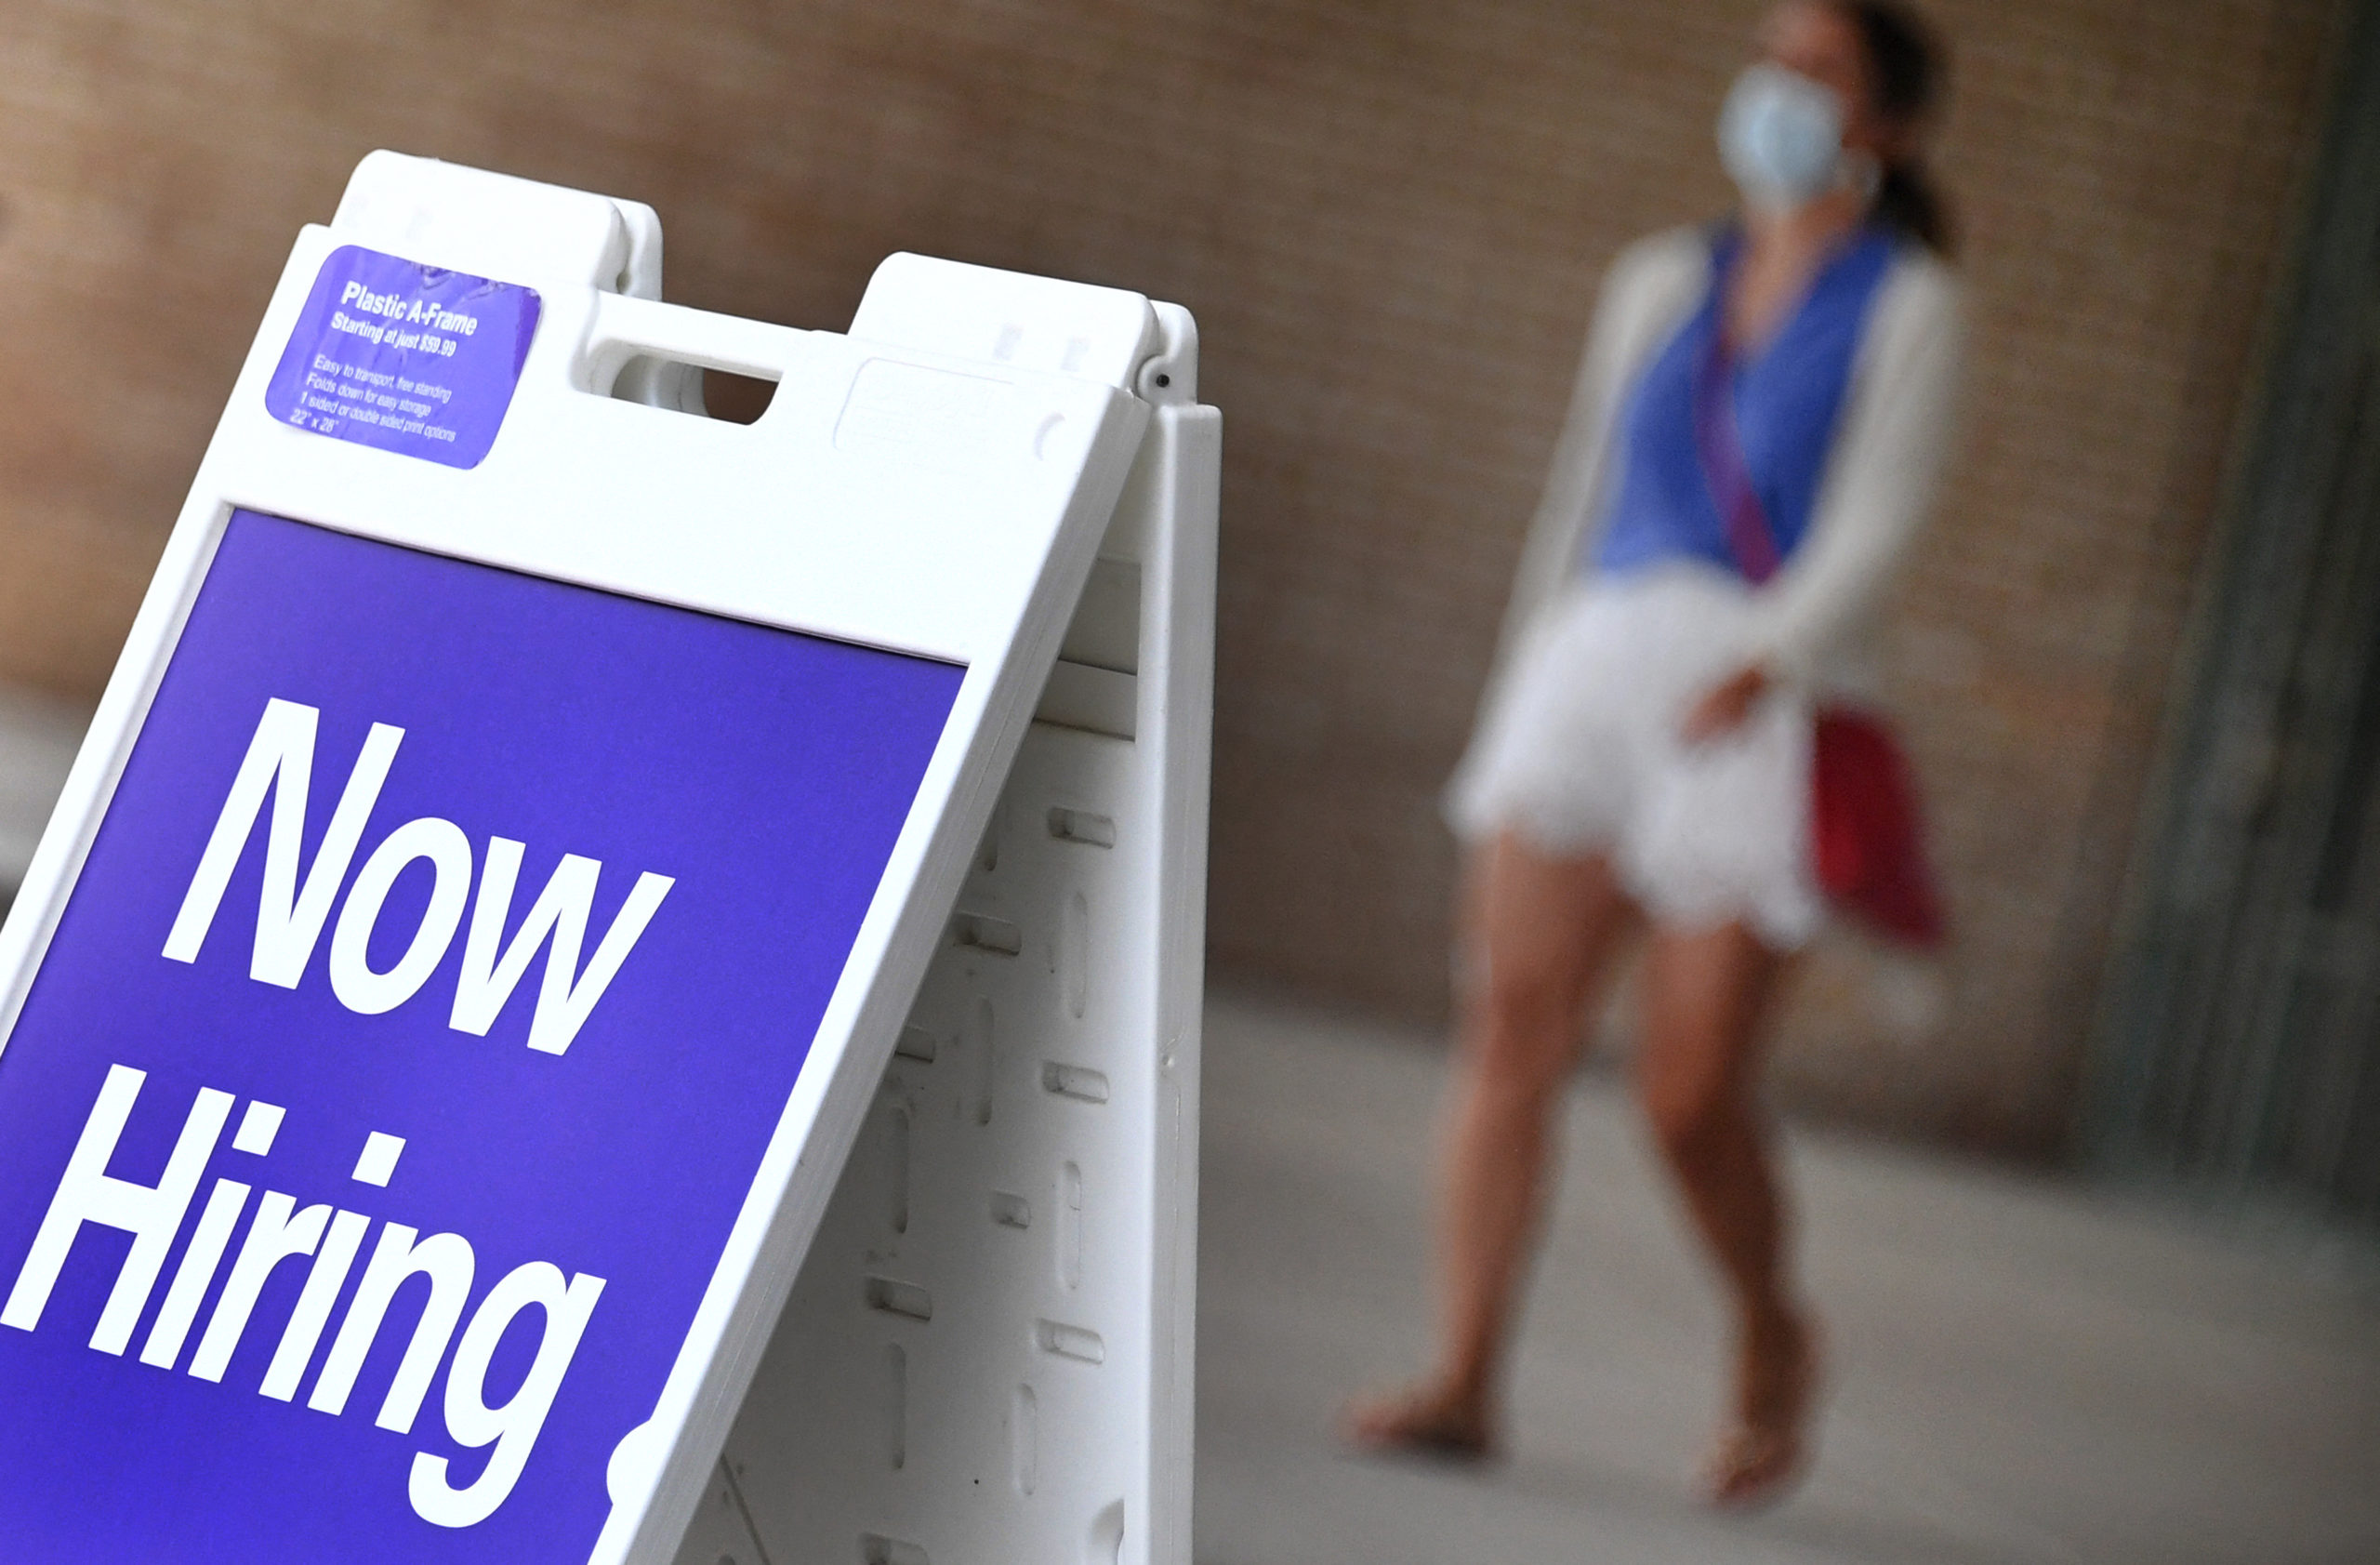 Pedestrians walk by a "Now Hiring" sign outside a store in Arlington, Virginia on Aug. 16. (Olivier Douliery/AFP via Getty Images)